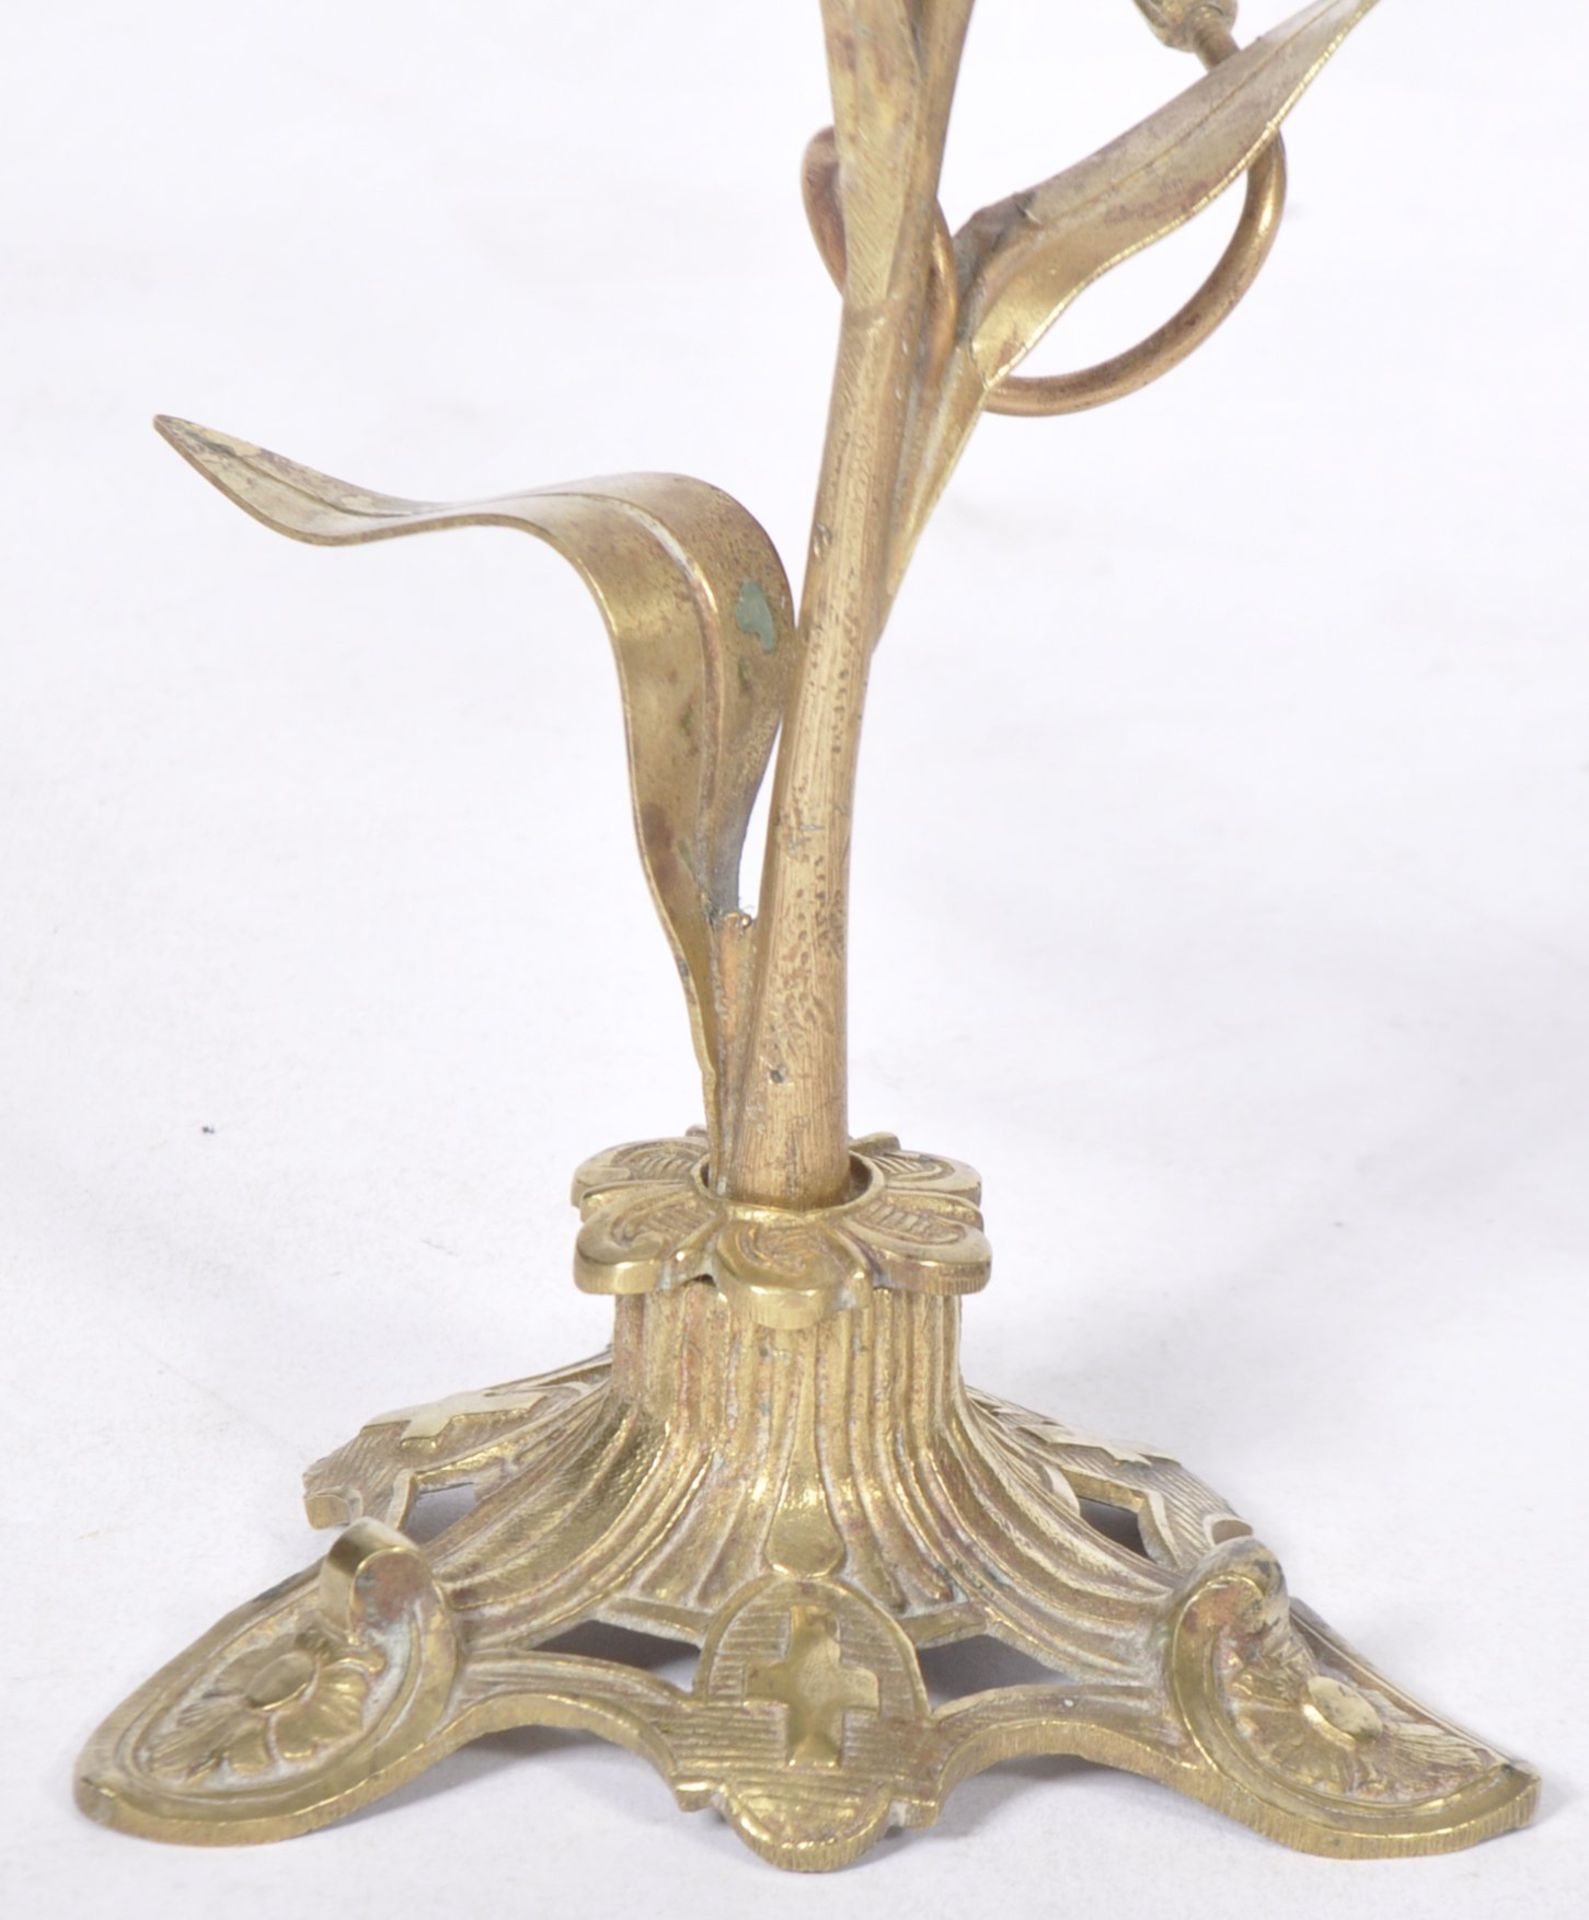 MATCHING PAIR OF 19TH CENTURY FRENCH BRASS CANDLESTICKS - Image 4 of 7